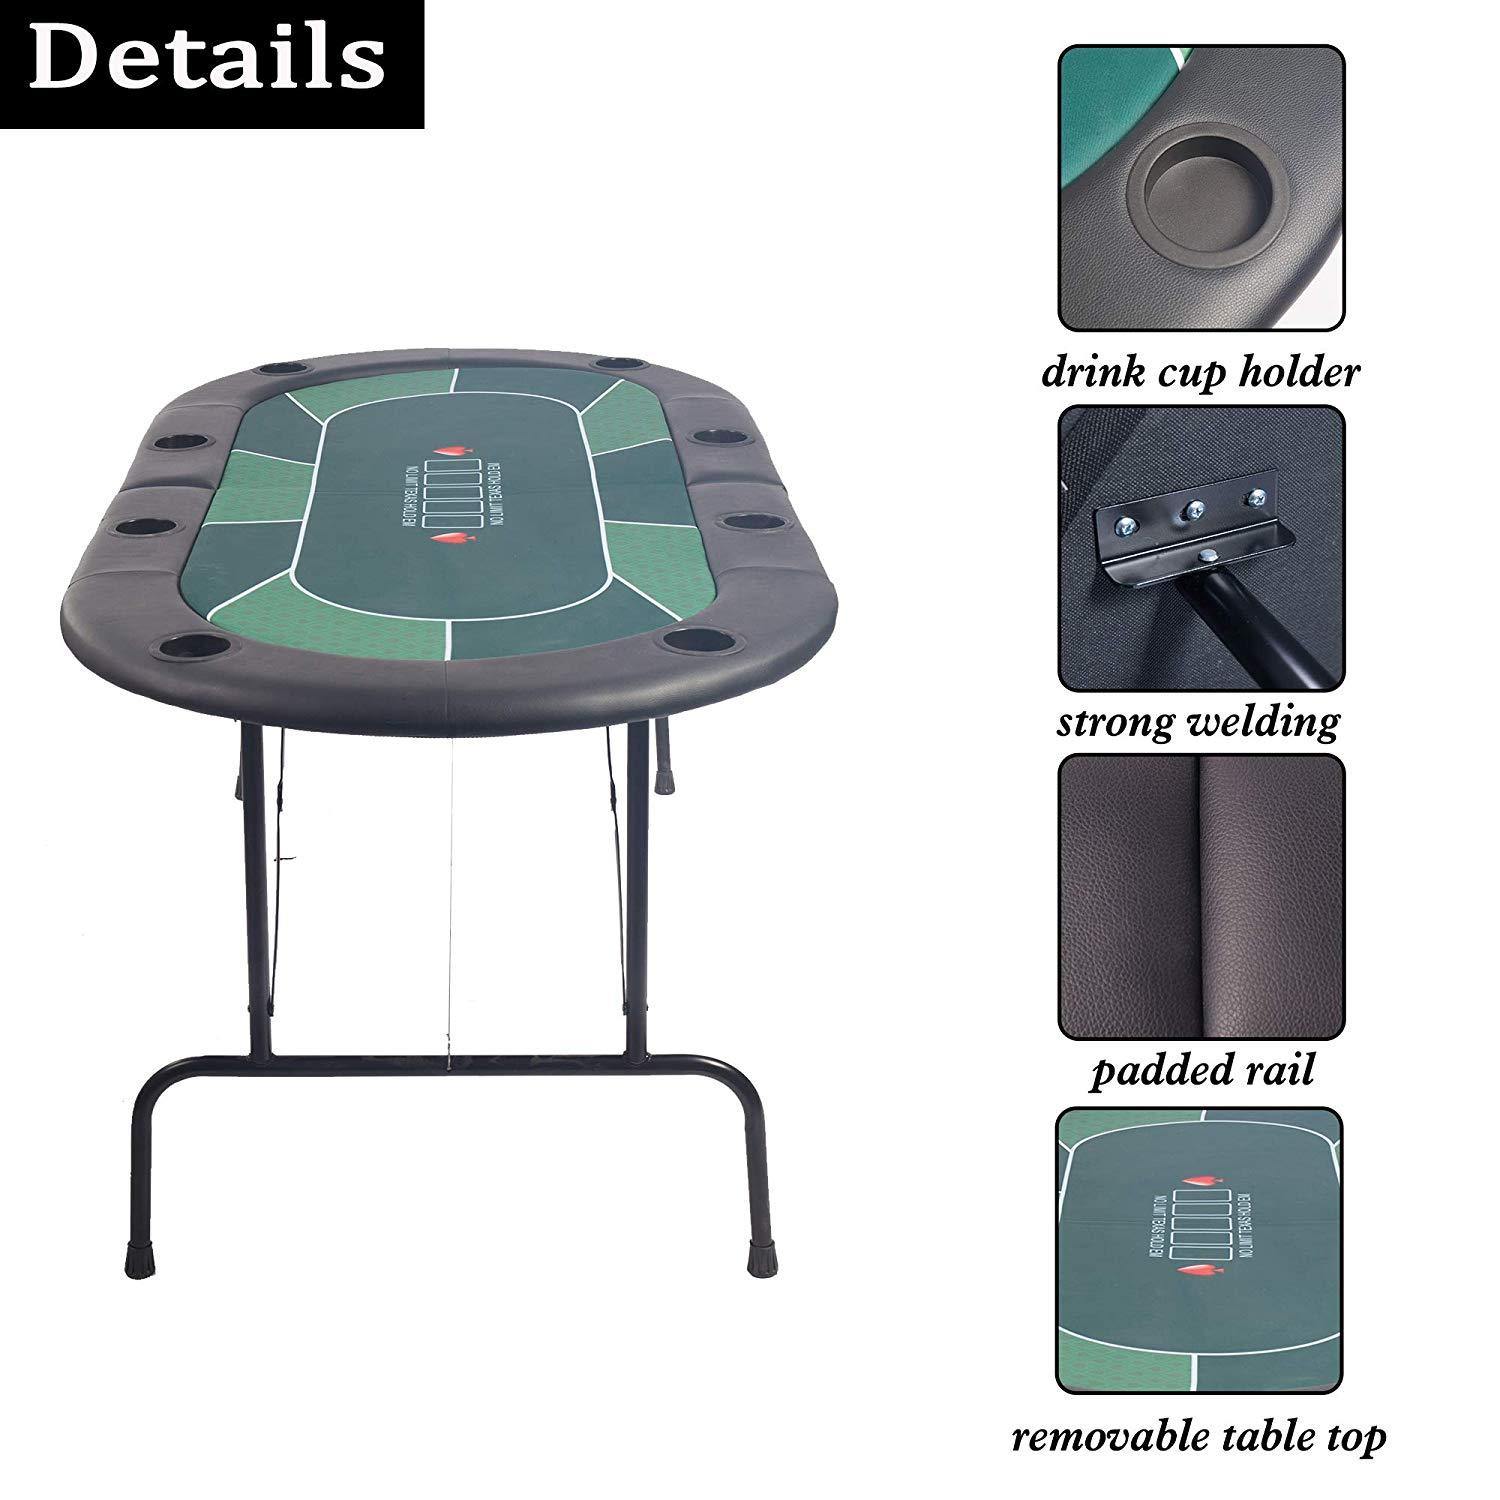 Bosonshop 8 Players Foldable Poker Table Casino Texas Game Table with Drink Cup Holder